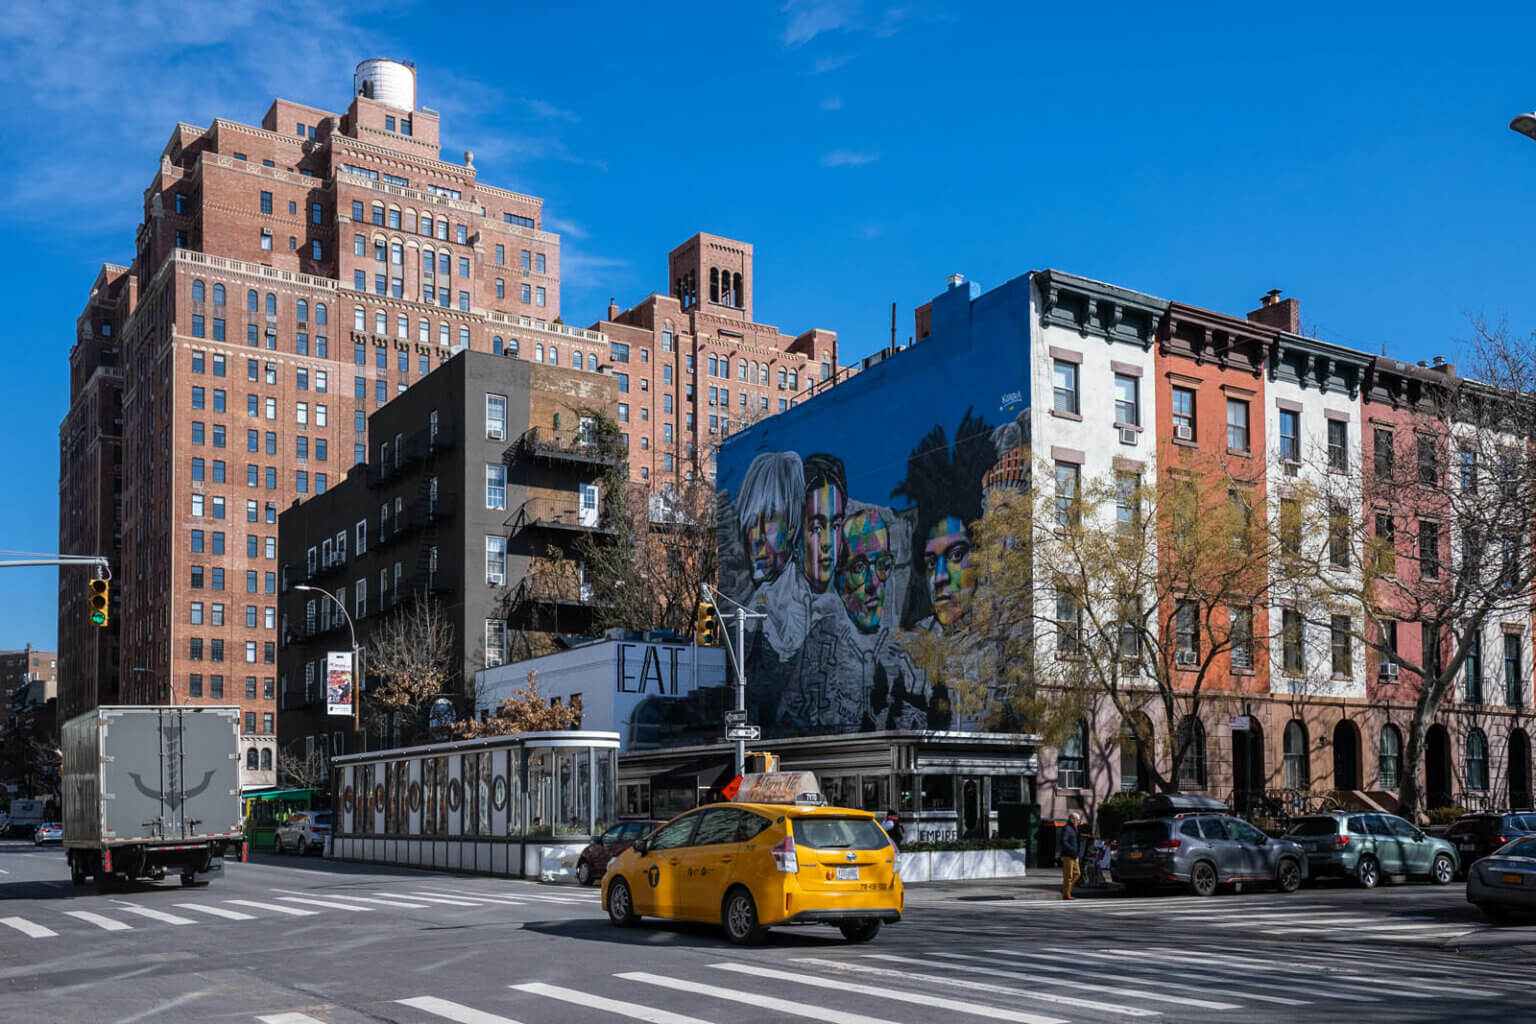 View of Empire Diner and Kobra Mural in Chelsea NYC